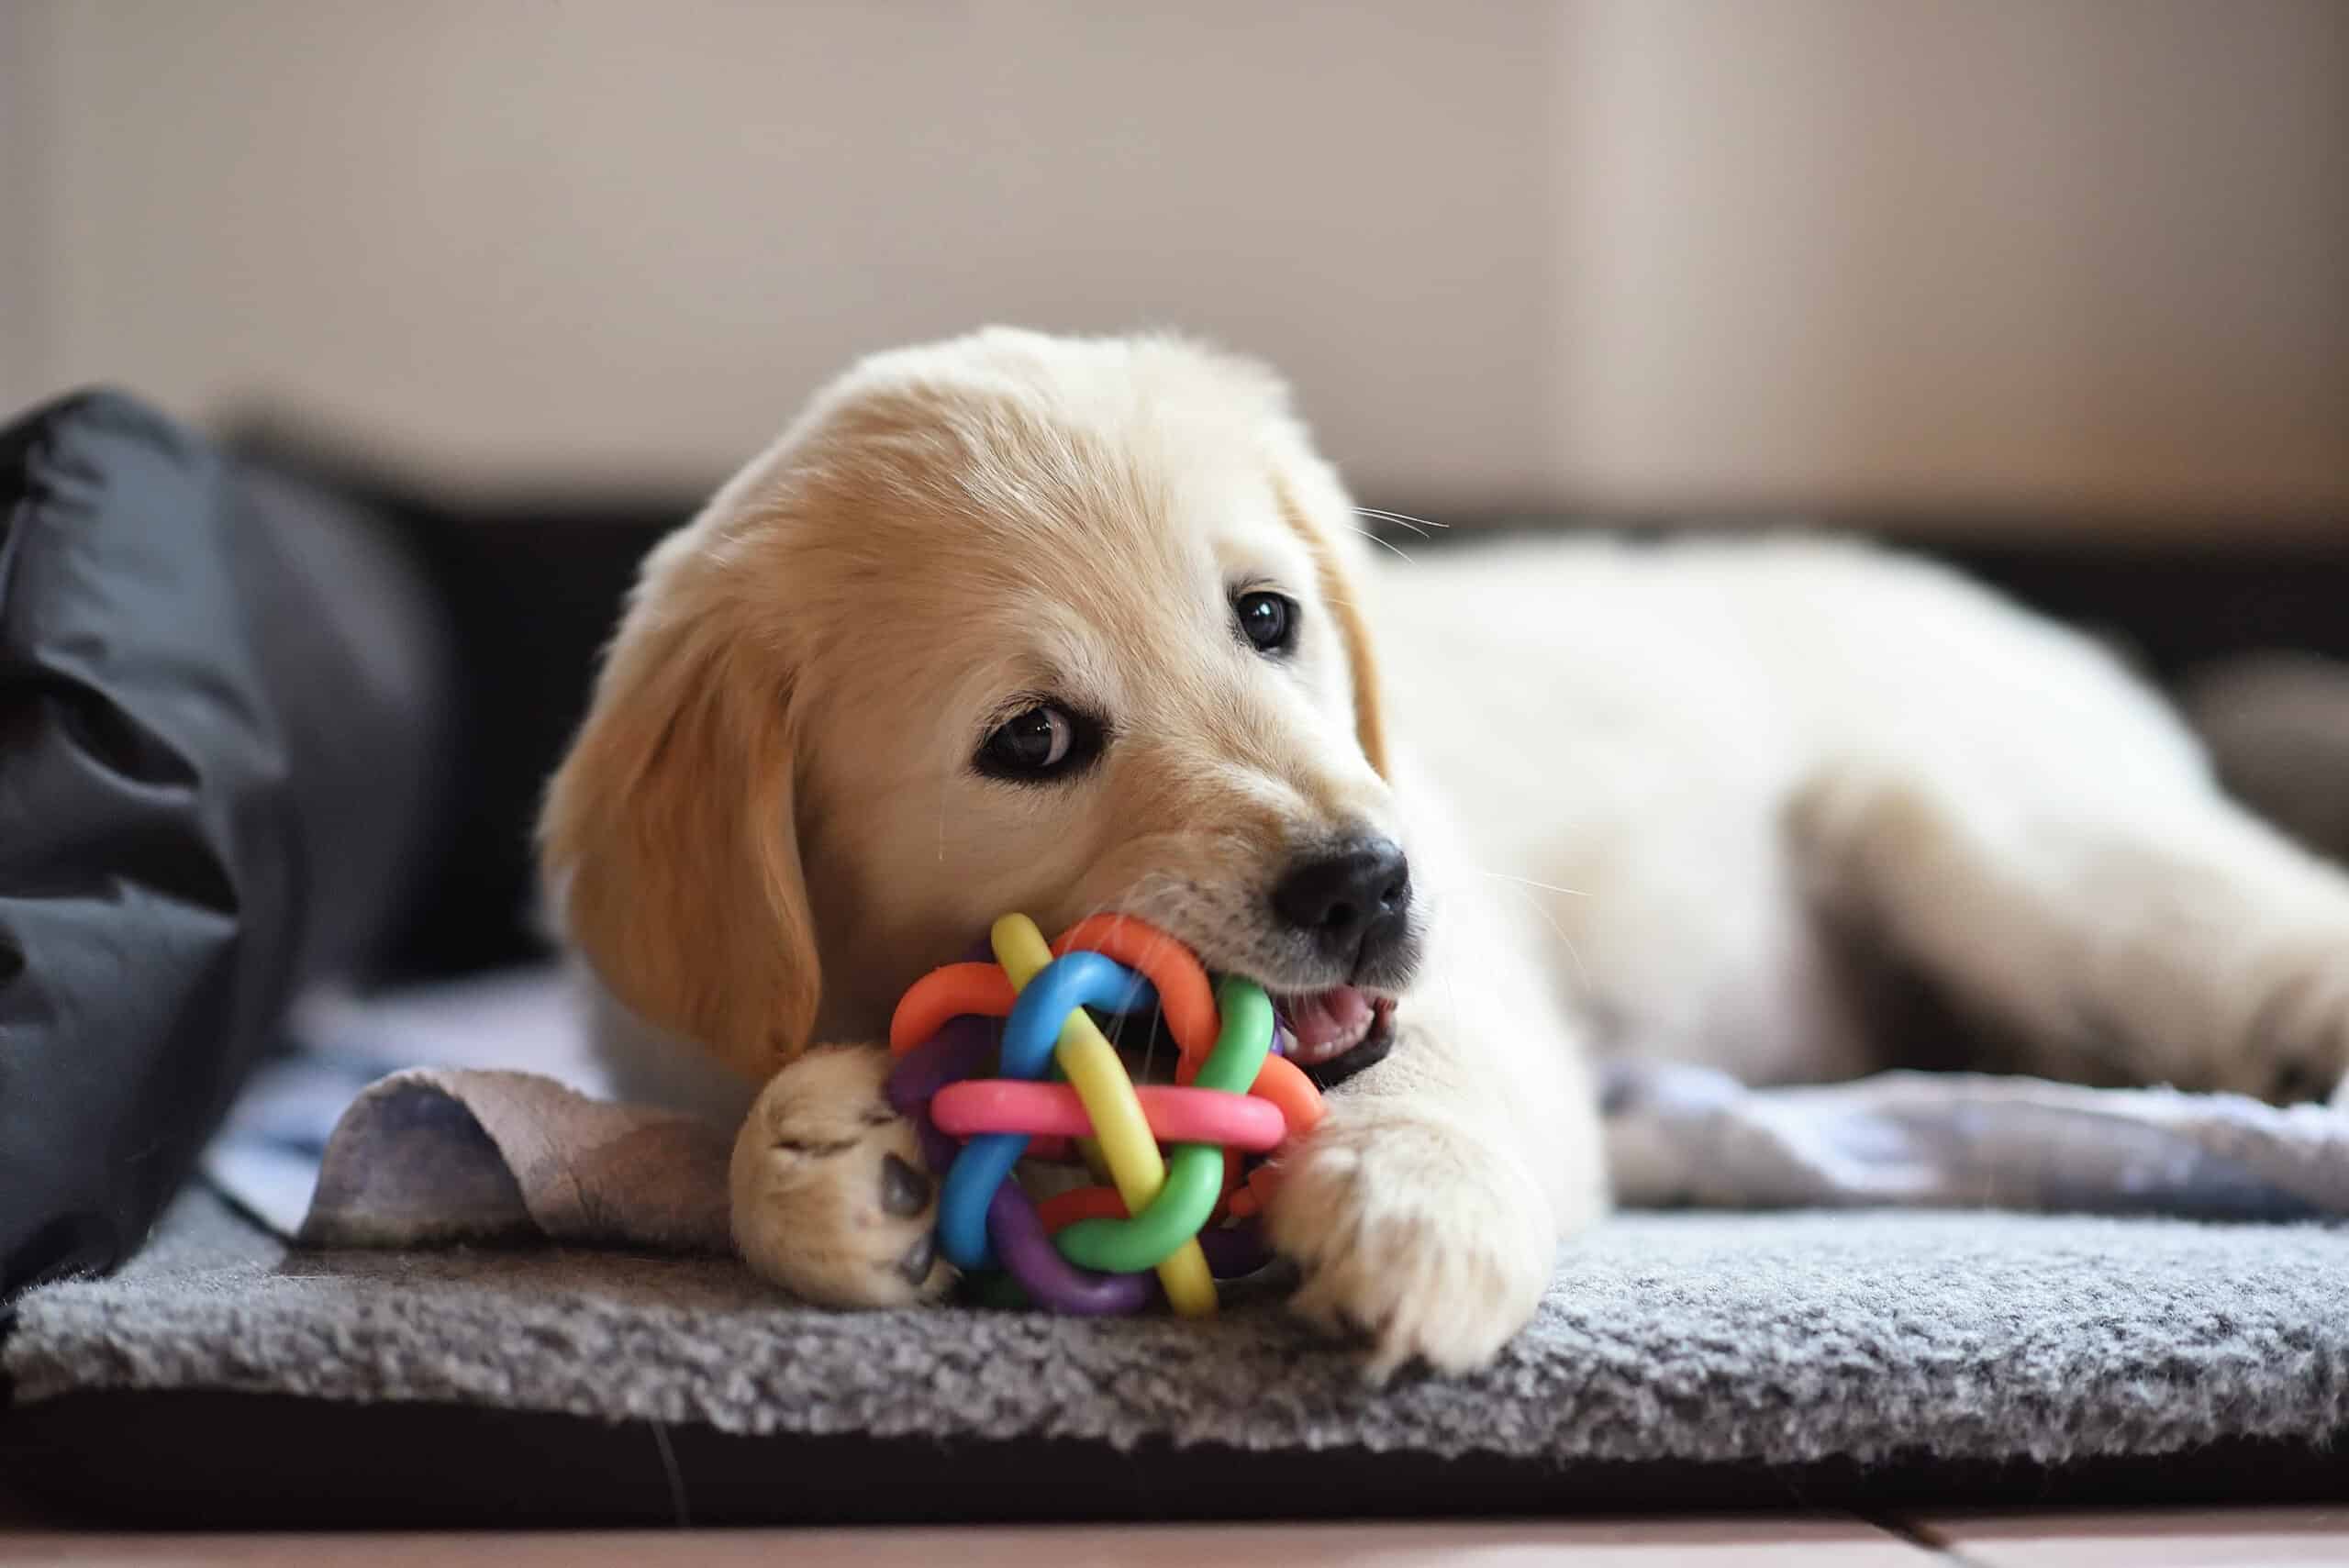 Puppy Whining While Chewing Toy